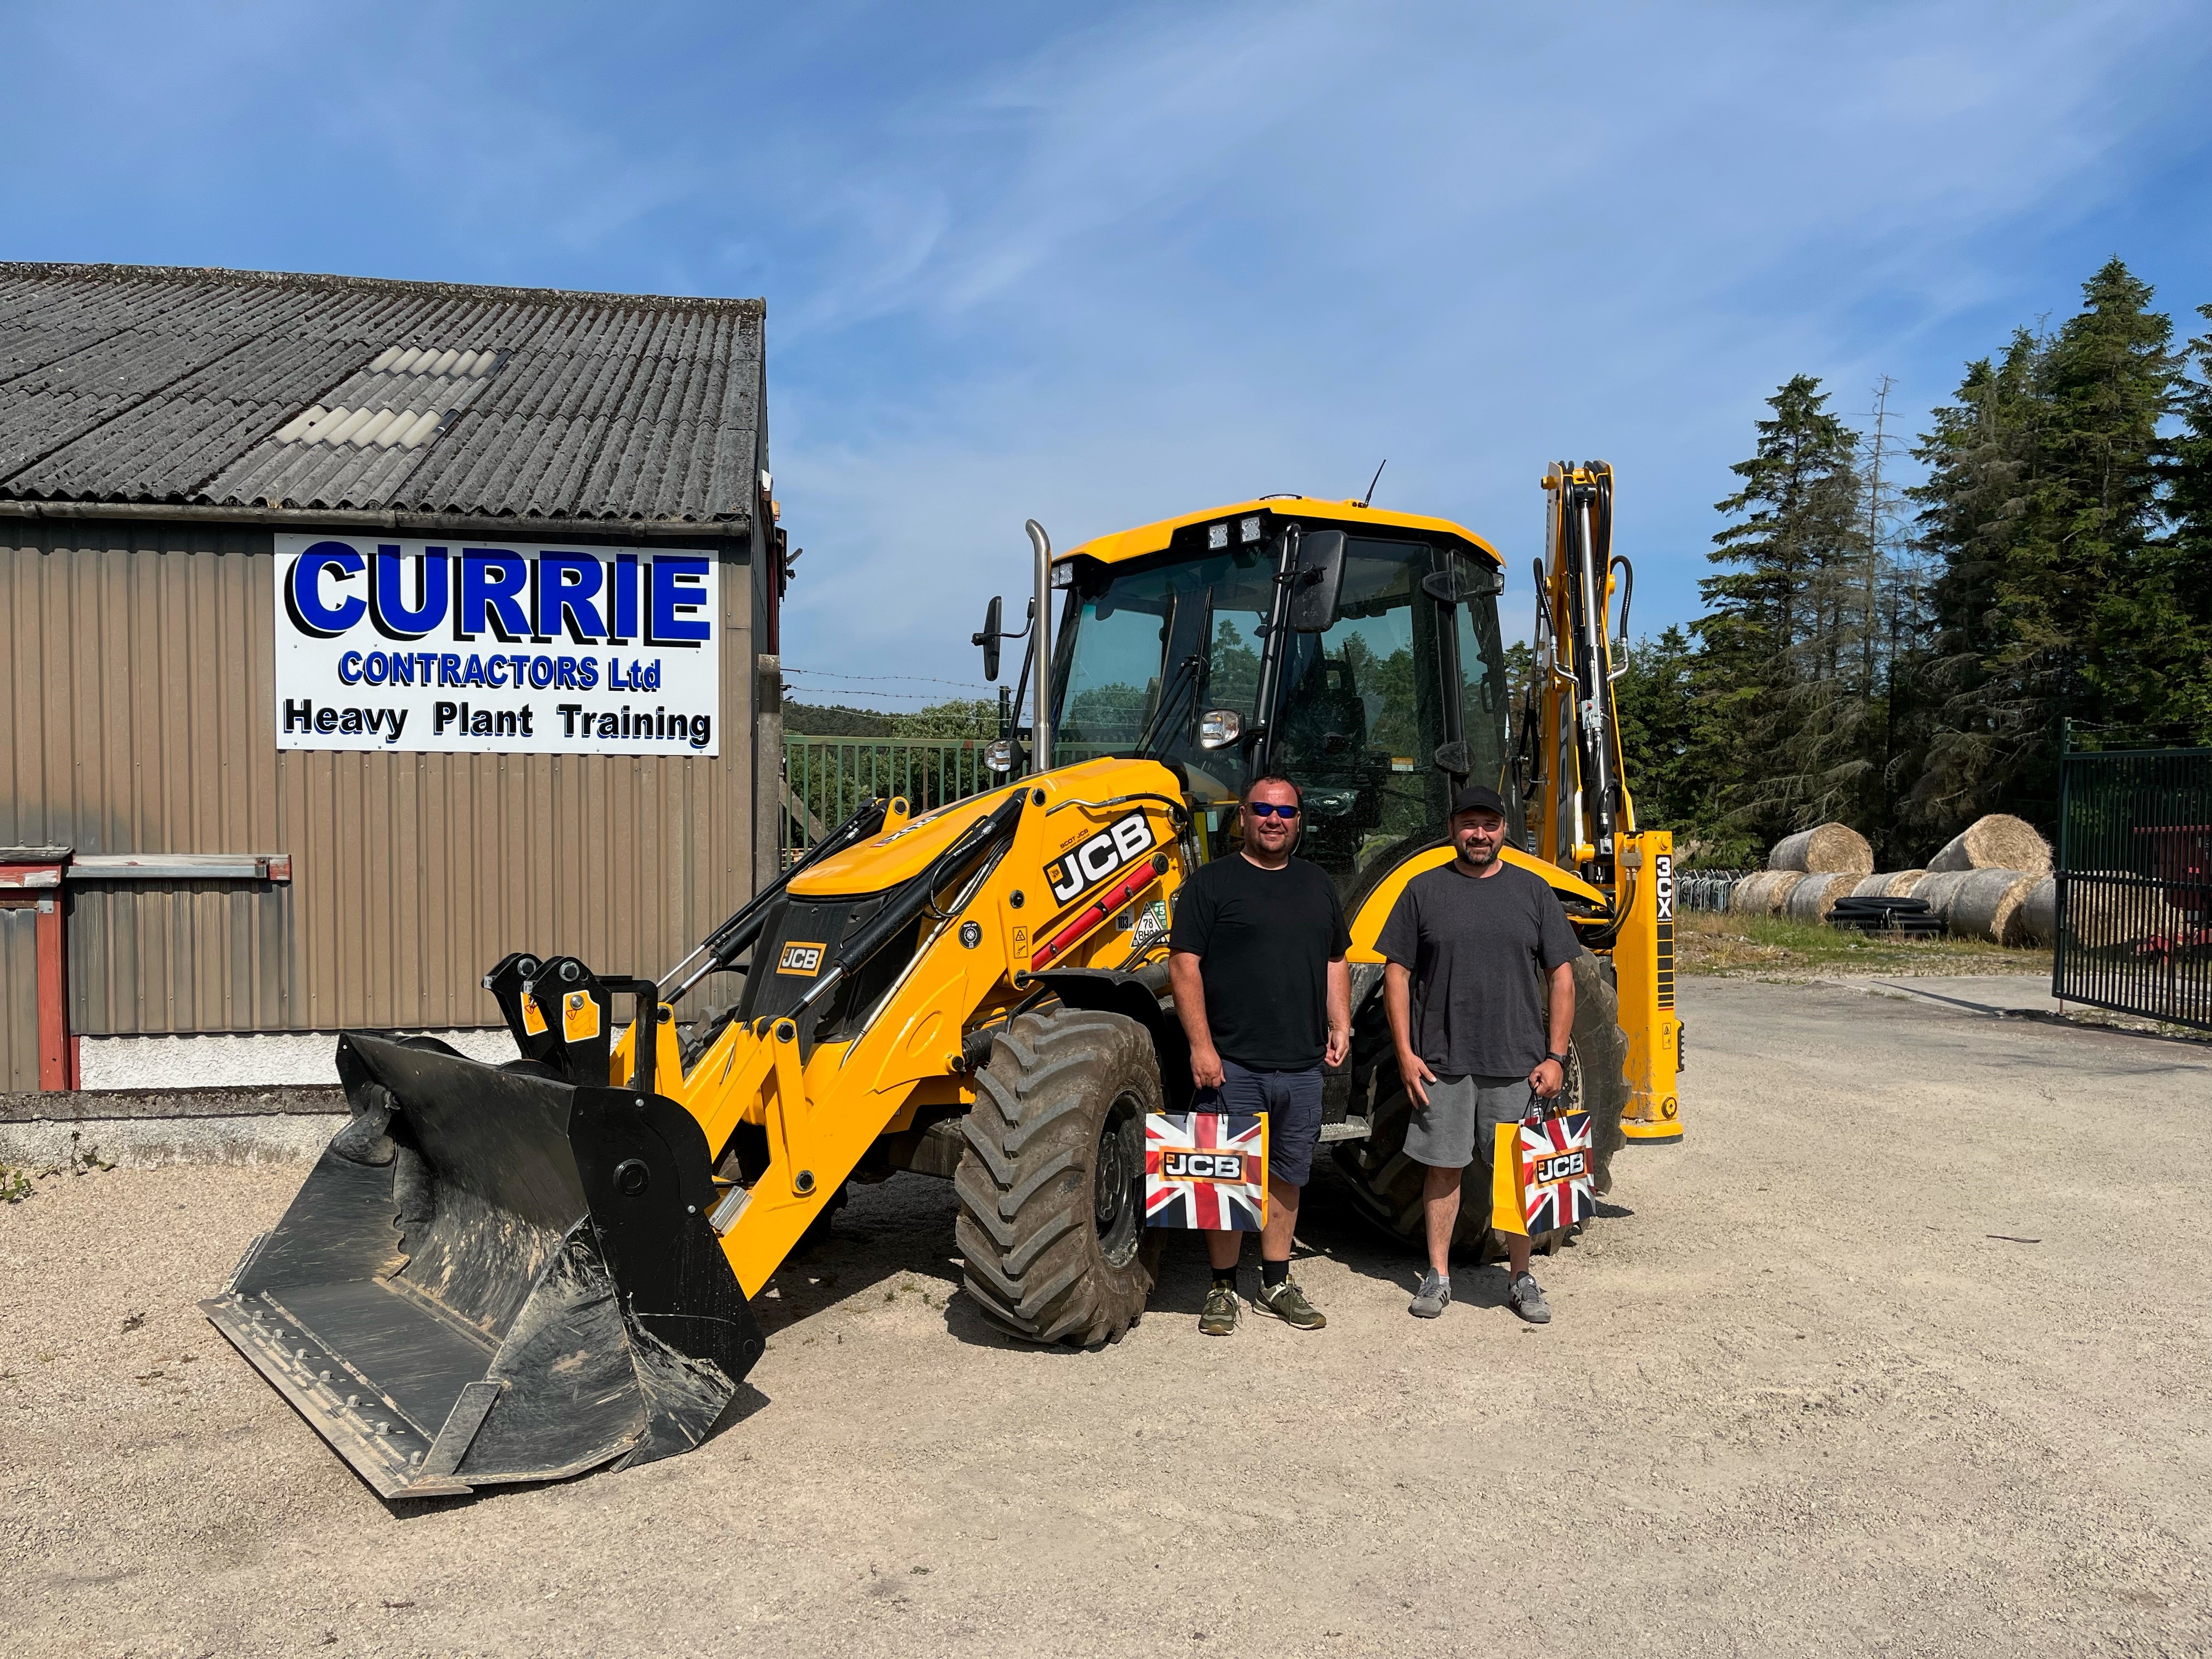 JCB and Heavy Plant Training deliver backhoe loader training to north of Scotland